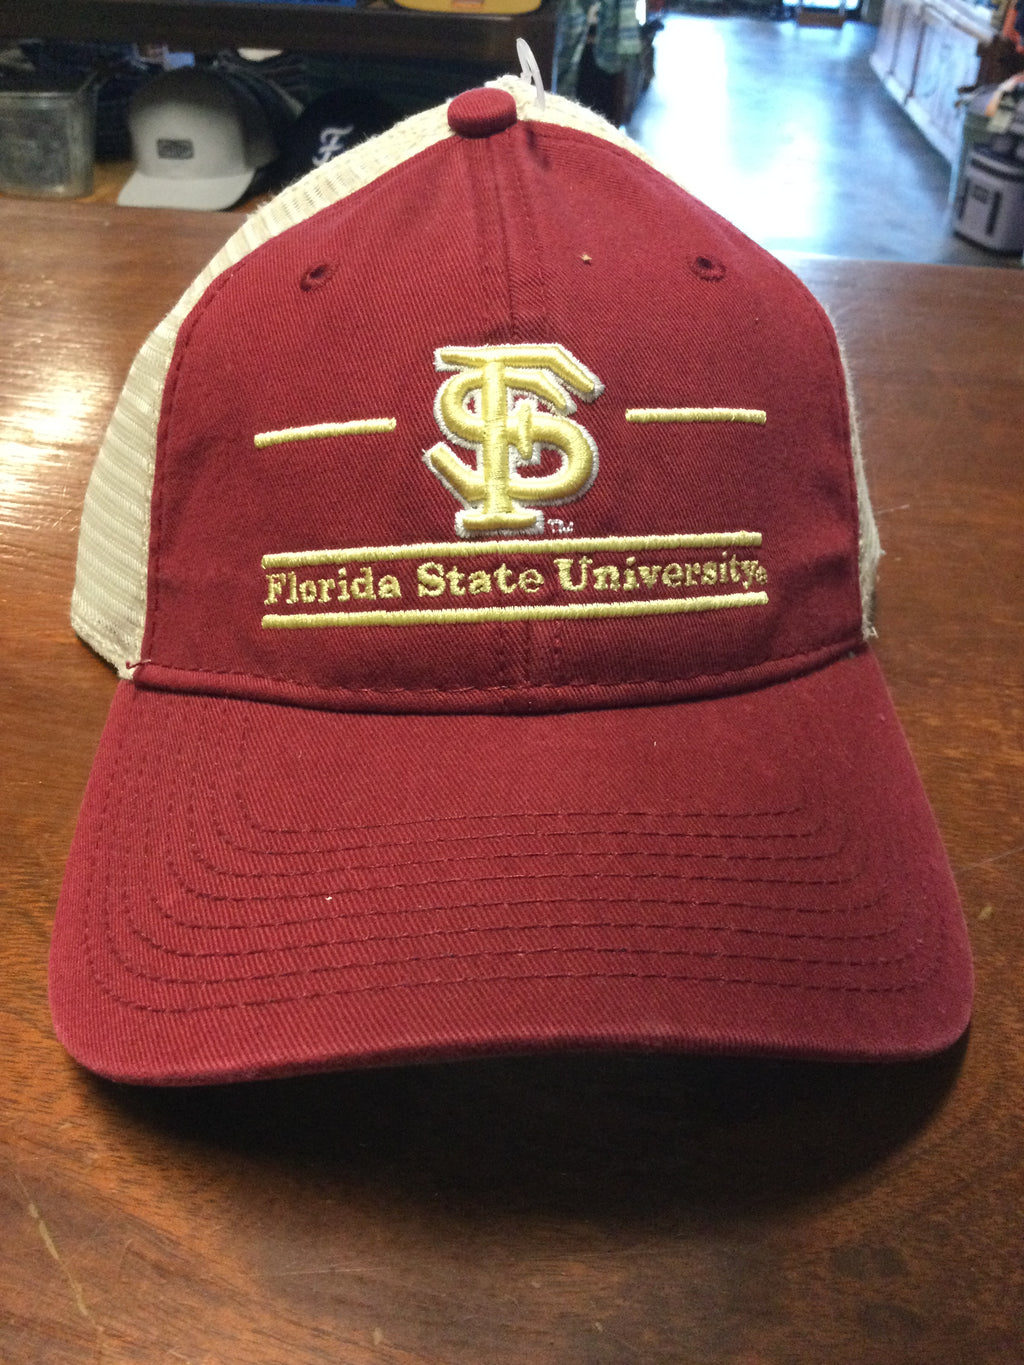 FSU Hats by The Game